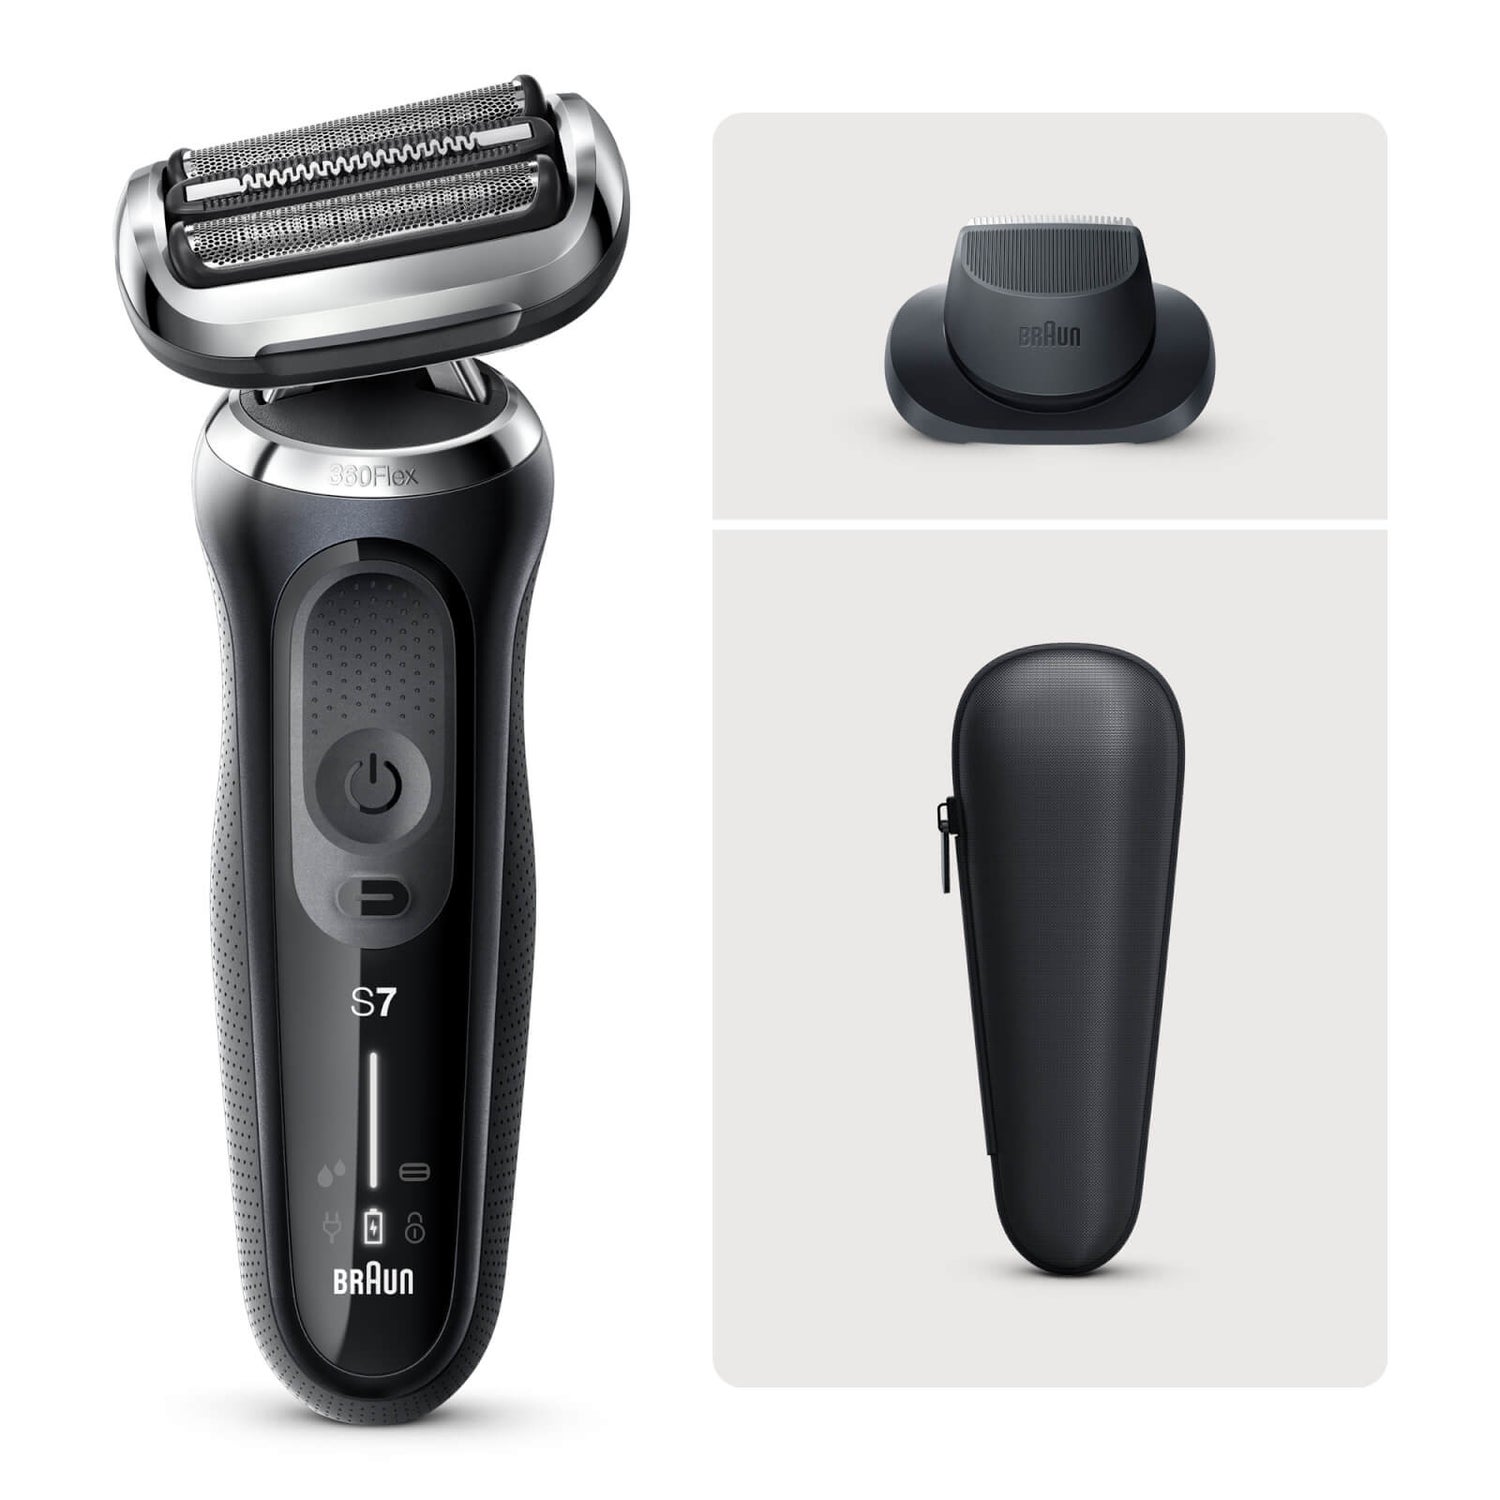 Braun Series 7 7071cc Wet and Dry Men's Electric Shaver for sale online